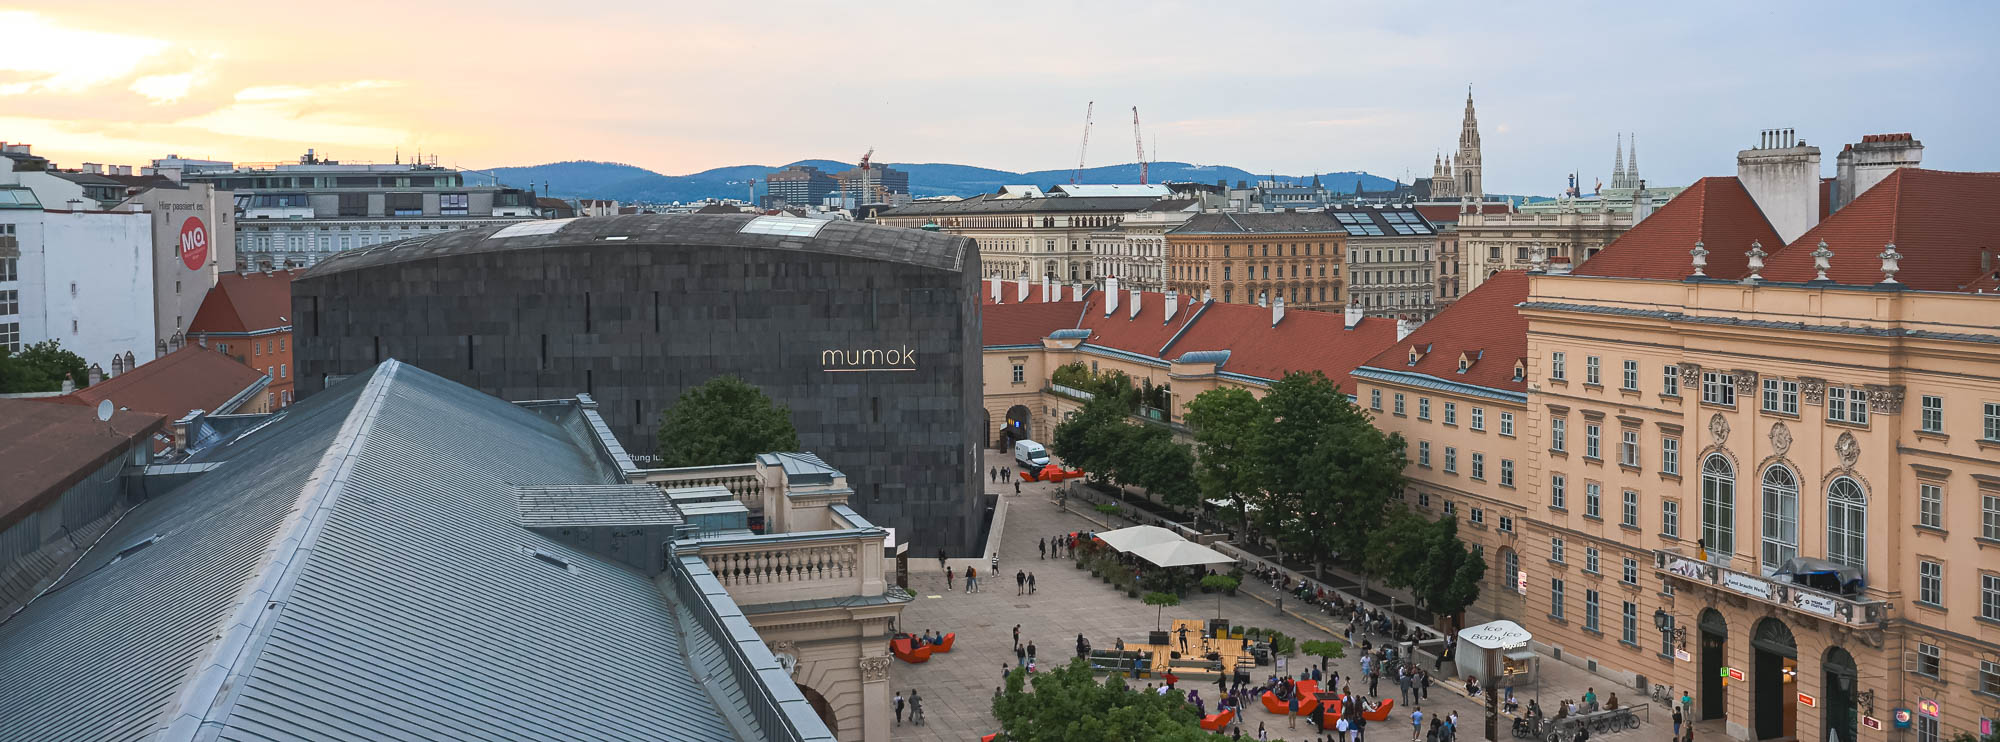 MuseumQuartier (MQ) from the rooftop of Leopold Museum in Neubau, Vienna